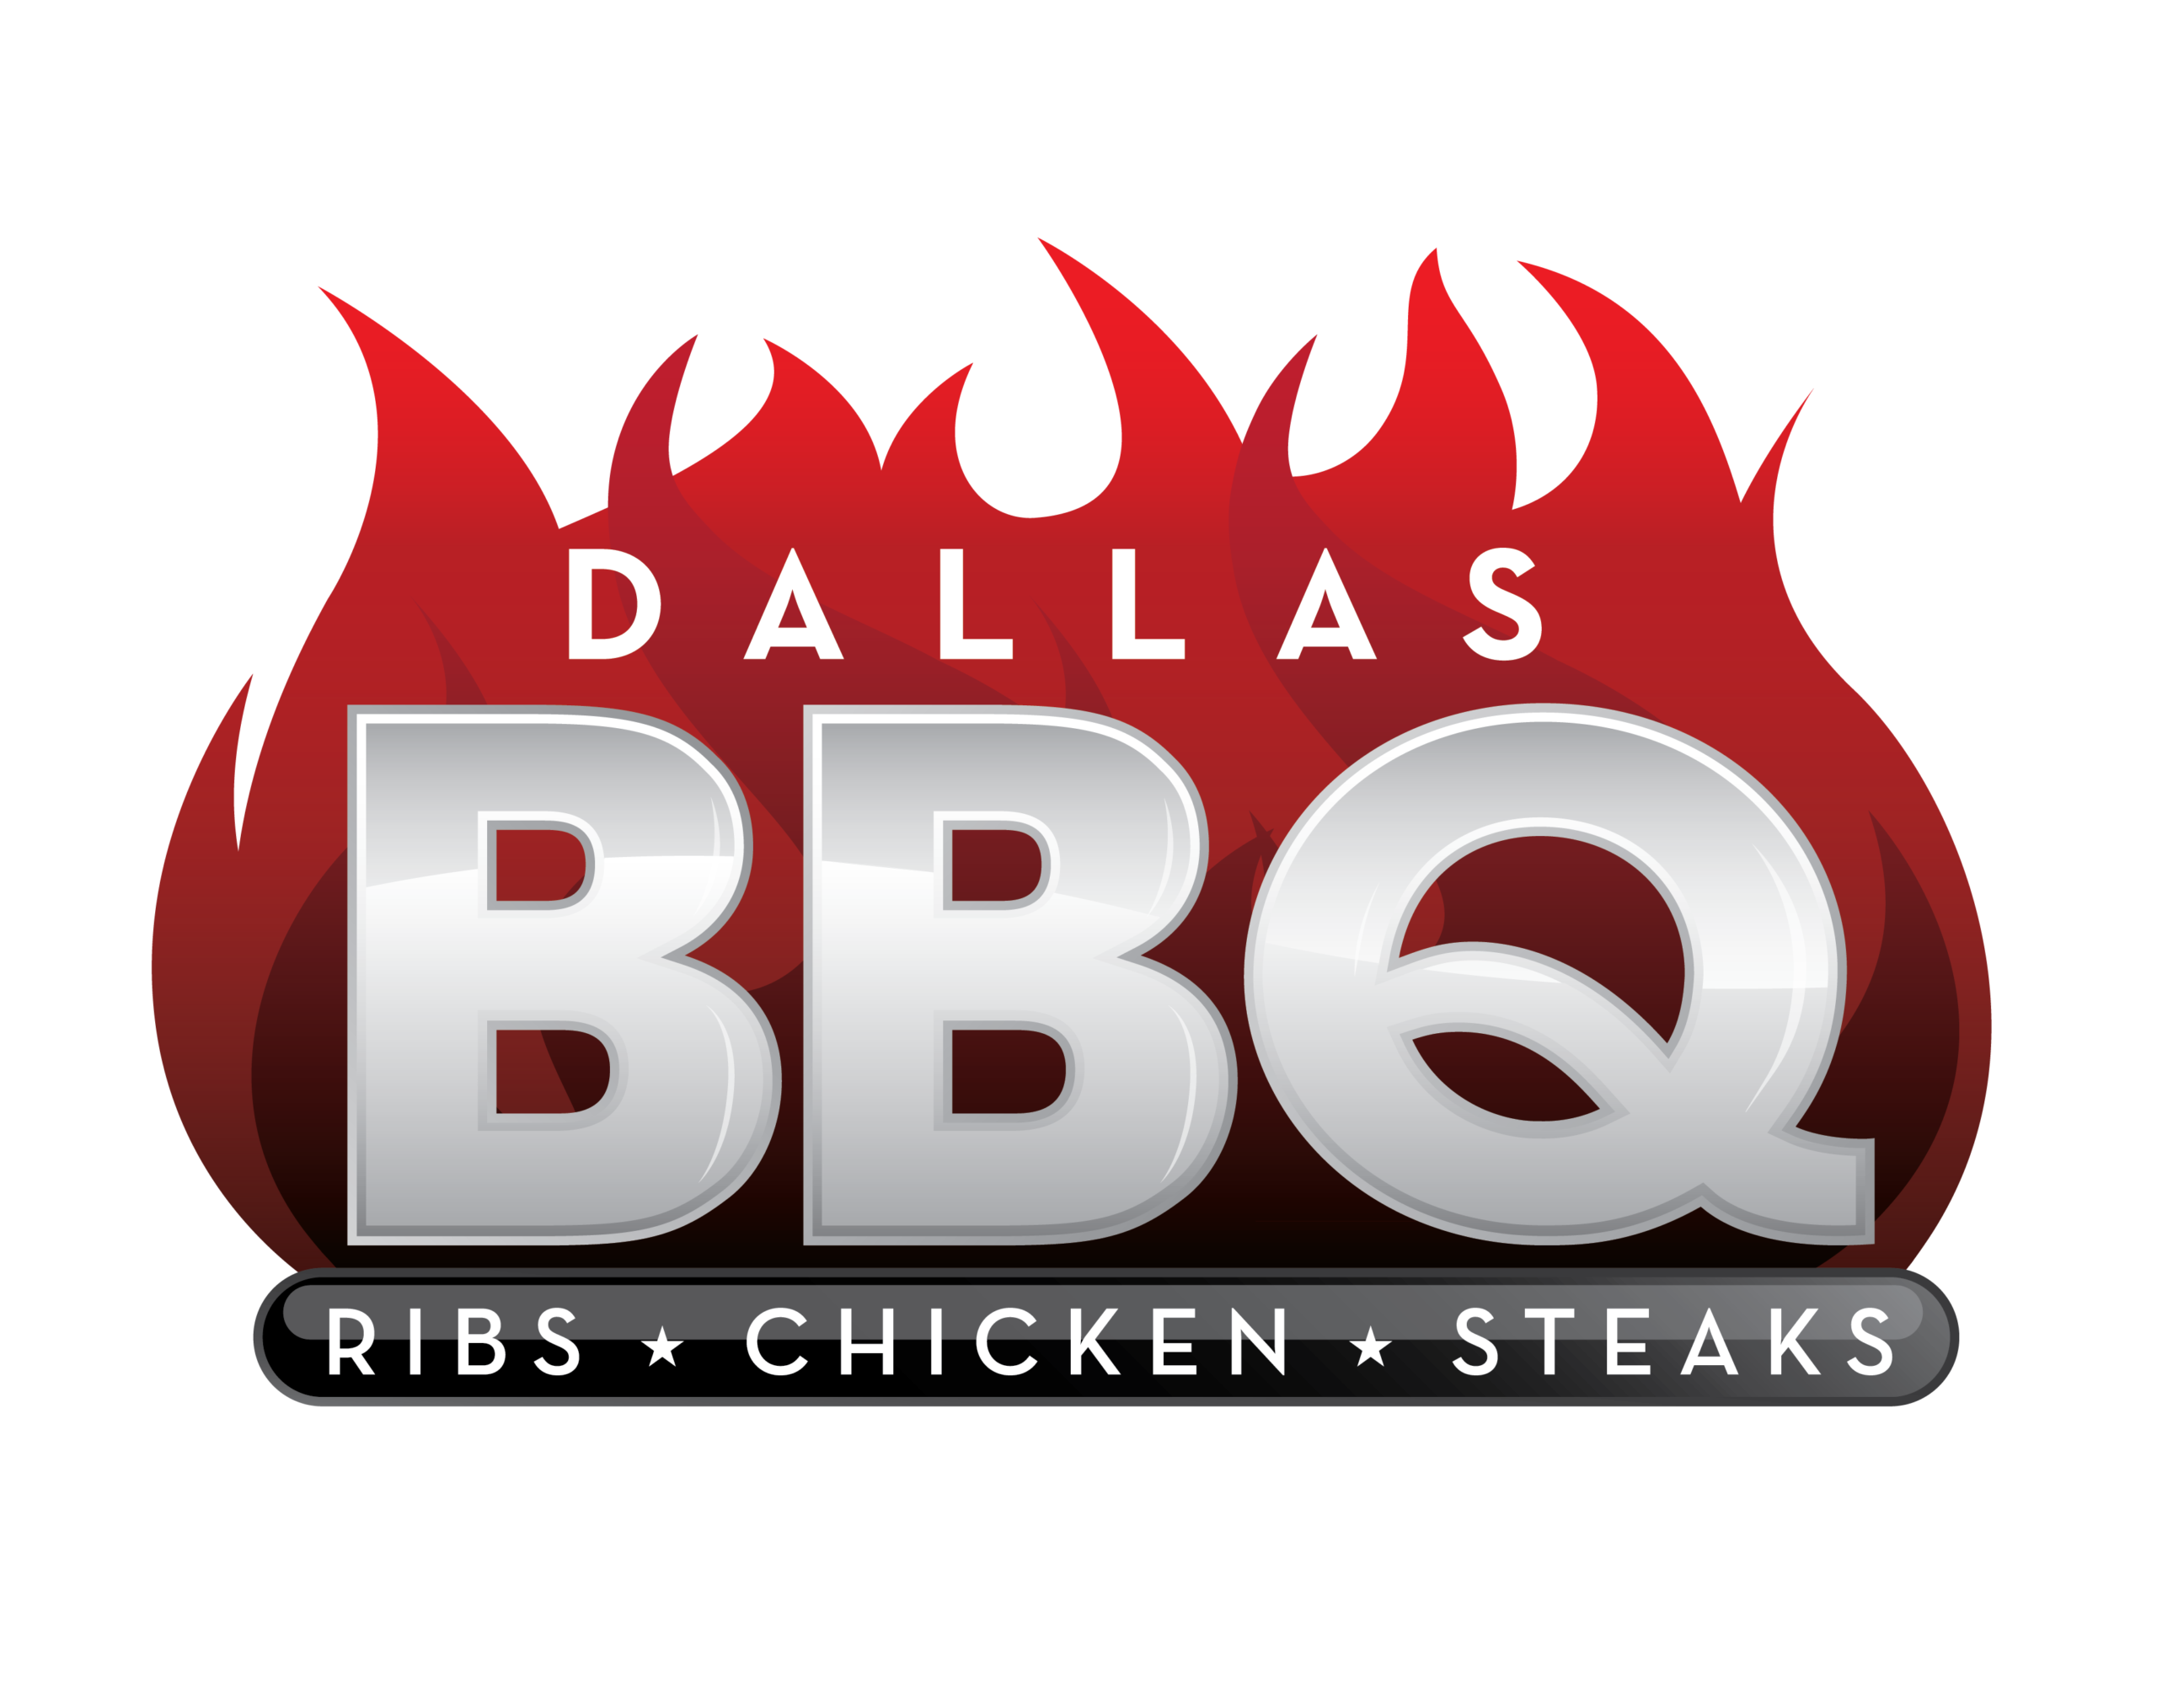 Restaurant Cleaners, cleaning services, professional cleaners, Cleaners NYC, NYC bar cleaners, NYC kitchen cleaners, Dallas BBQ, BBQ Ribs Chicken Steaks